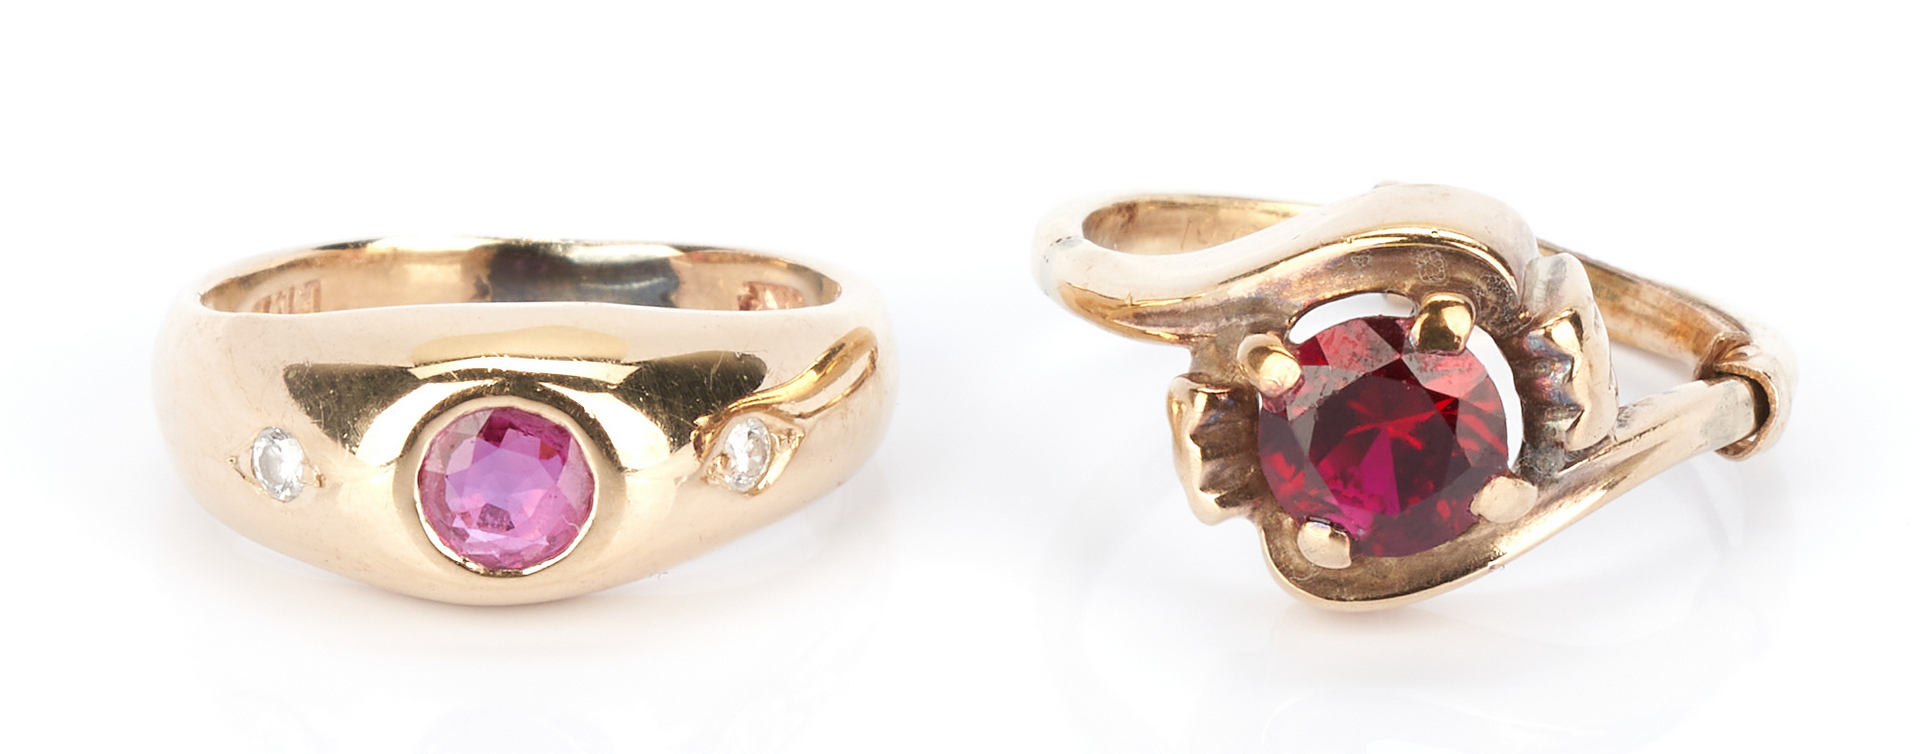 Lot 924: 5 Ladies 14K Ruby and Sapphire Rings